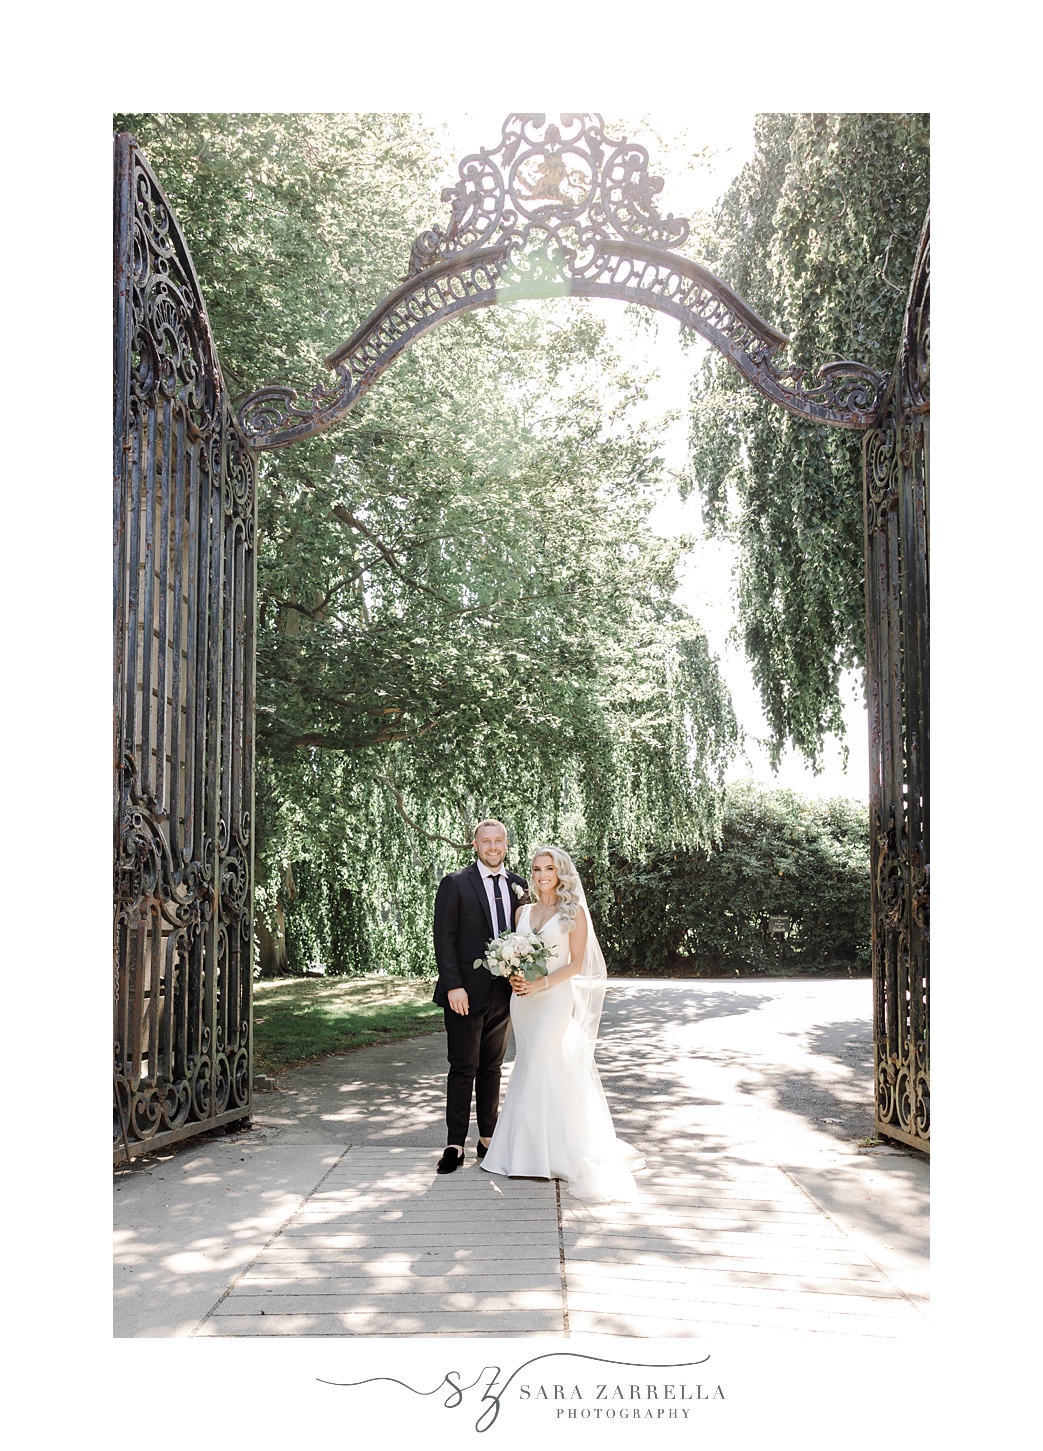 bride and groom pose under wrought iron gate at The Elms